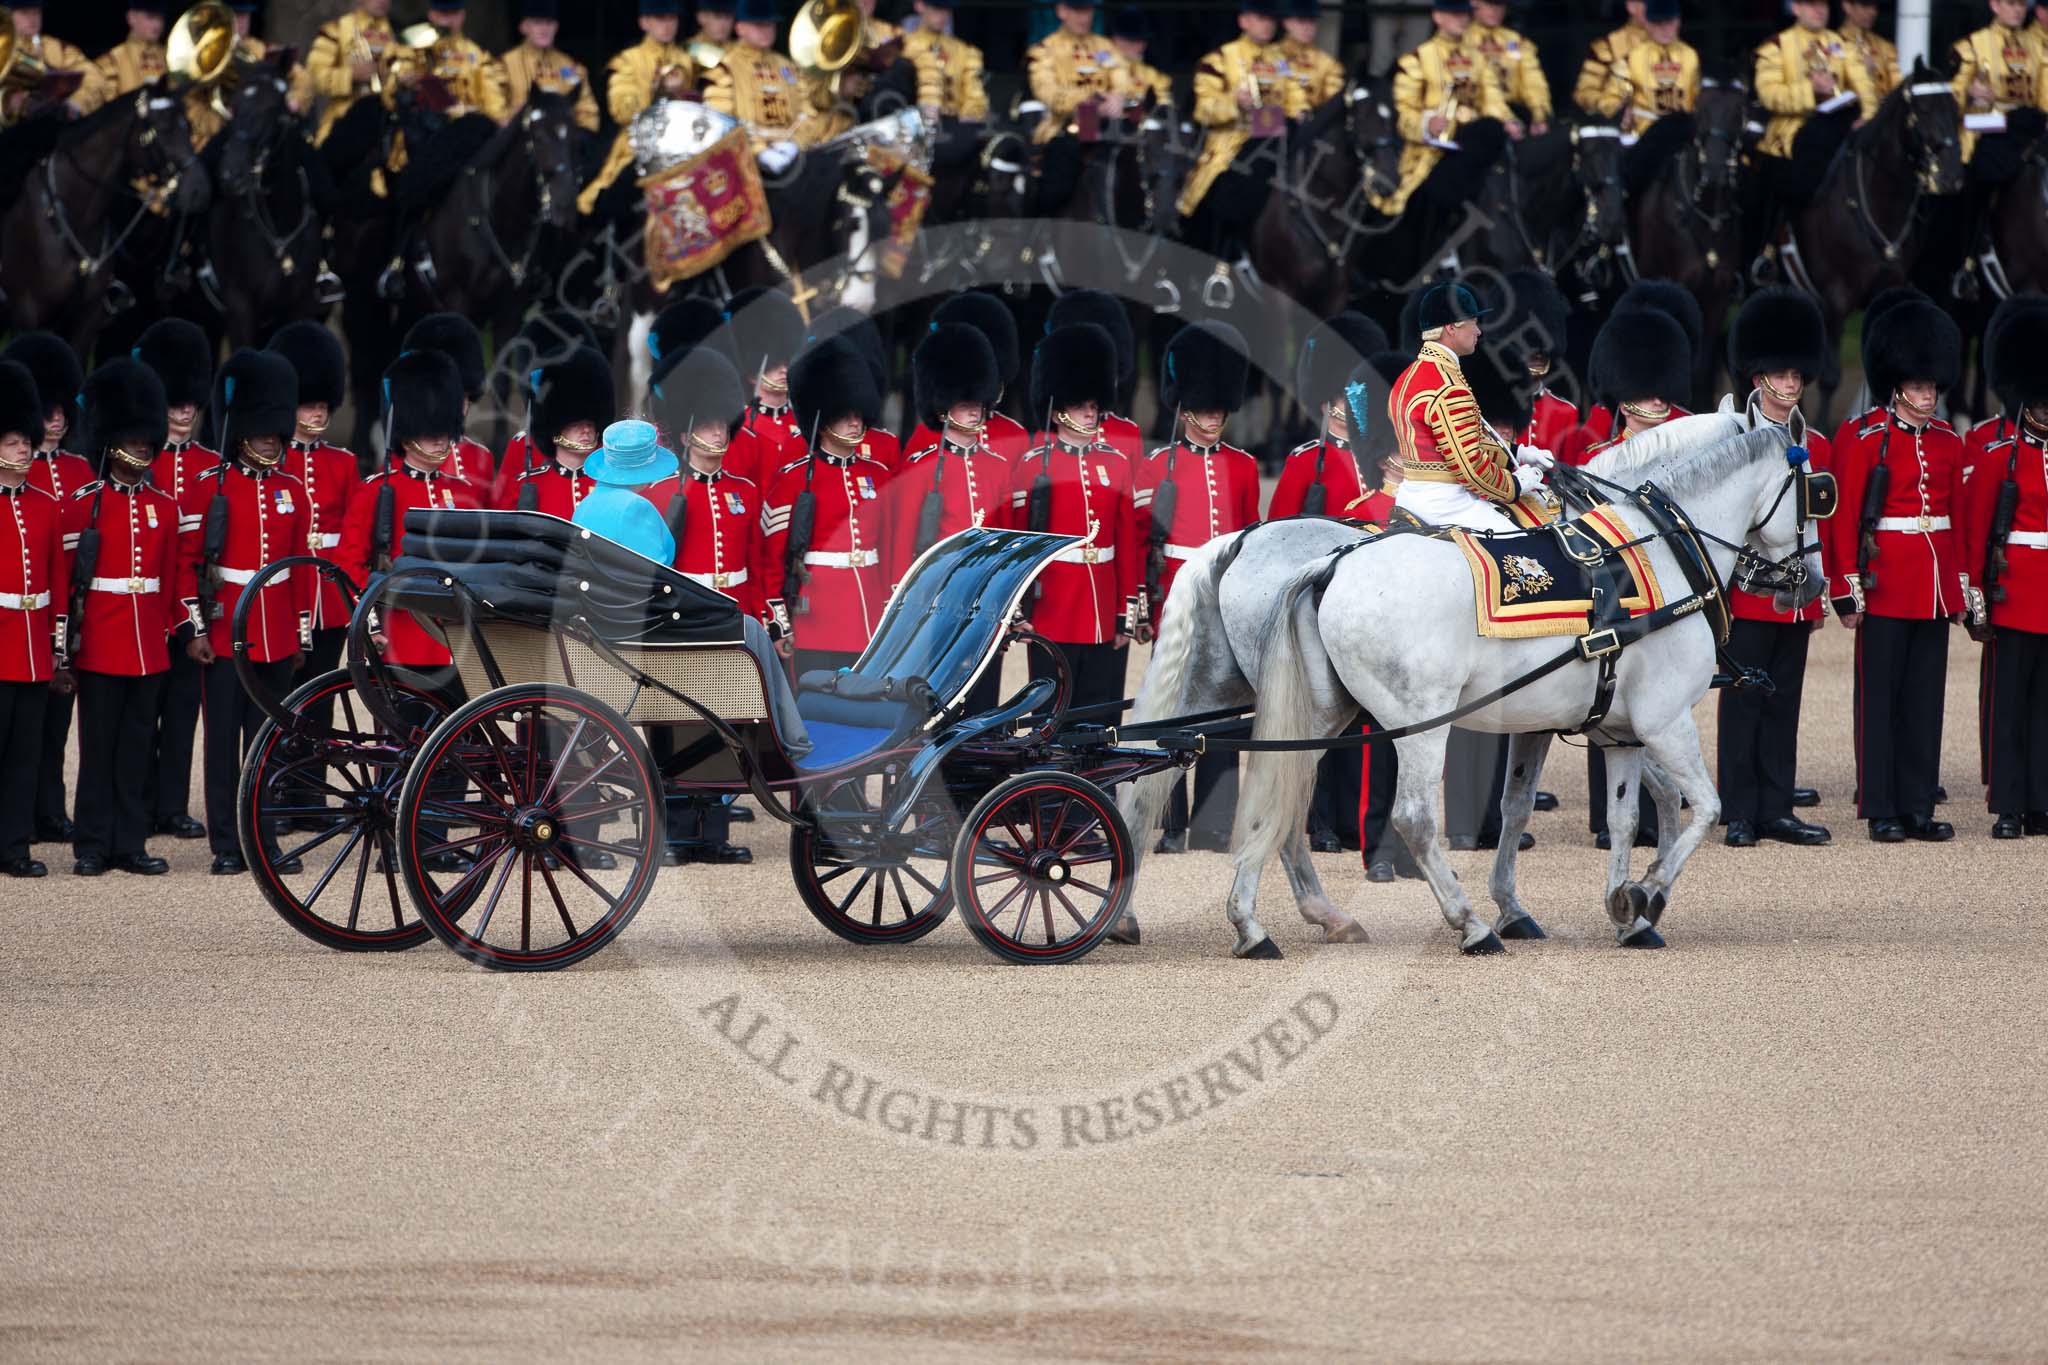 Trooping the Colour 2009: The Inspection of the Line, HM The Queen is driven along the line of guardsmen in the ivory mounted phaeton..
Horse Guards Parade, Westminster,
London SW1,

United Kingdom,
on 13 June 2009 at 11:02, image #144